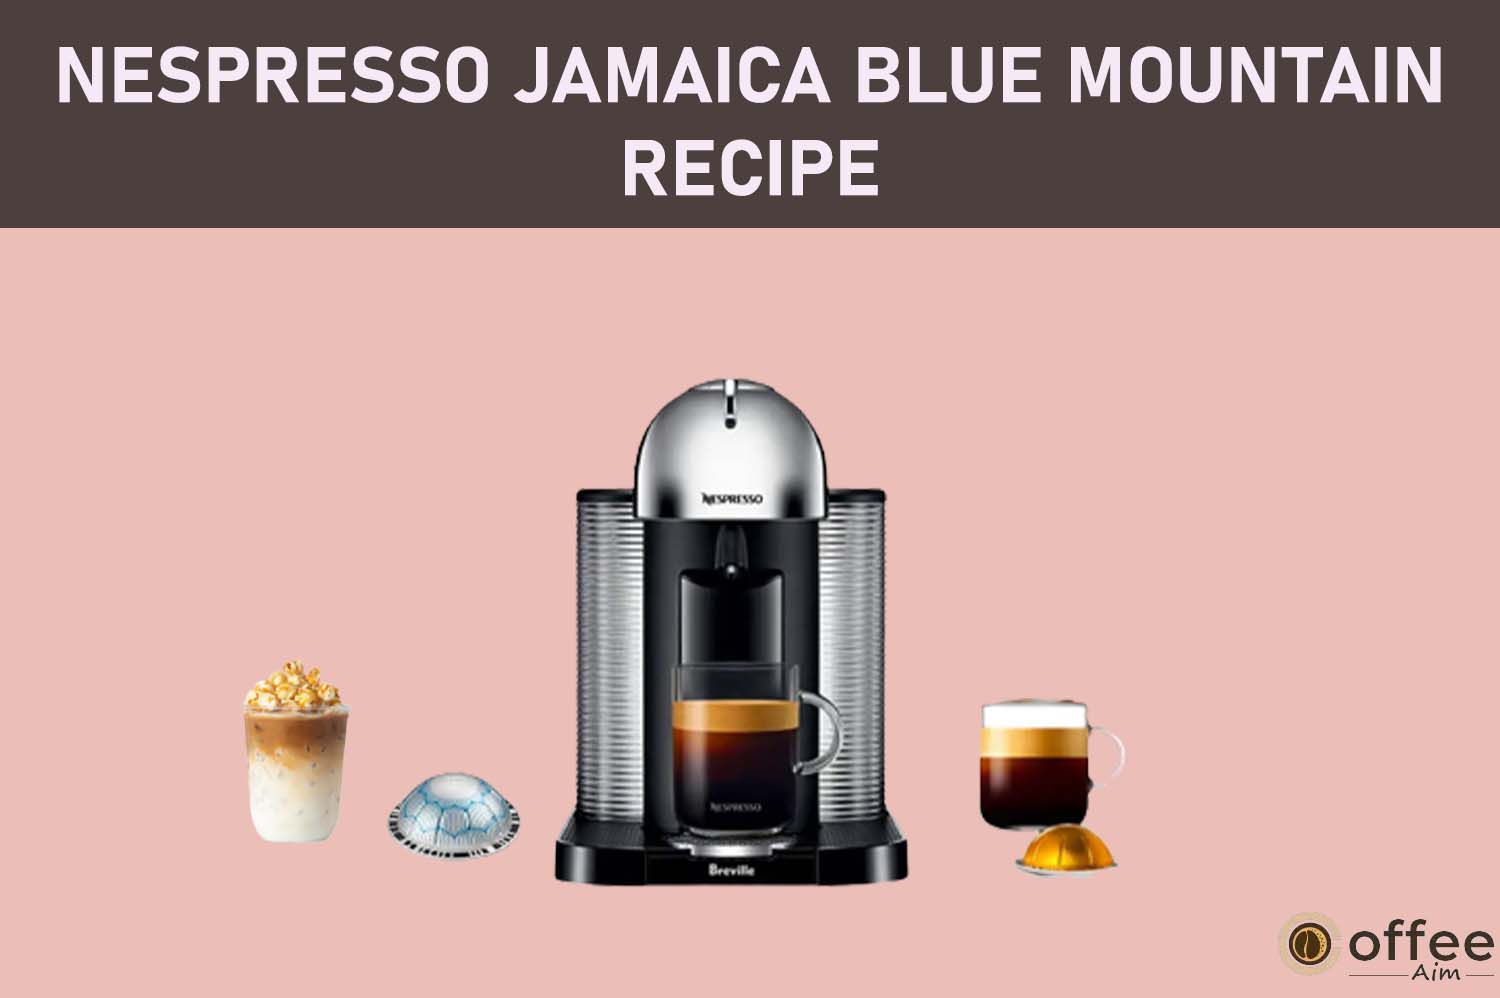 Featured image for the article "Nespresso Jamaica Blue Mountain Recipe"